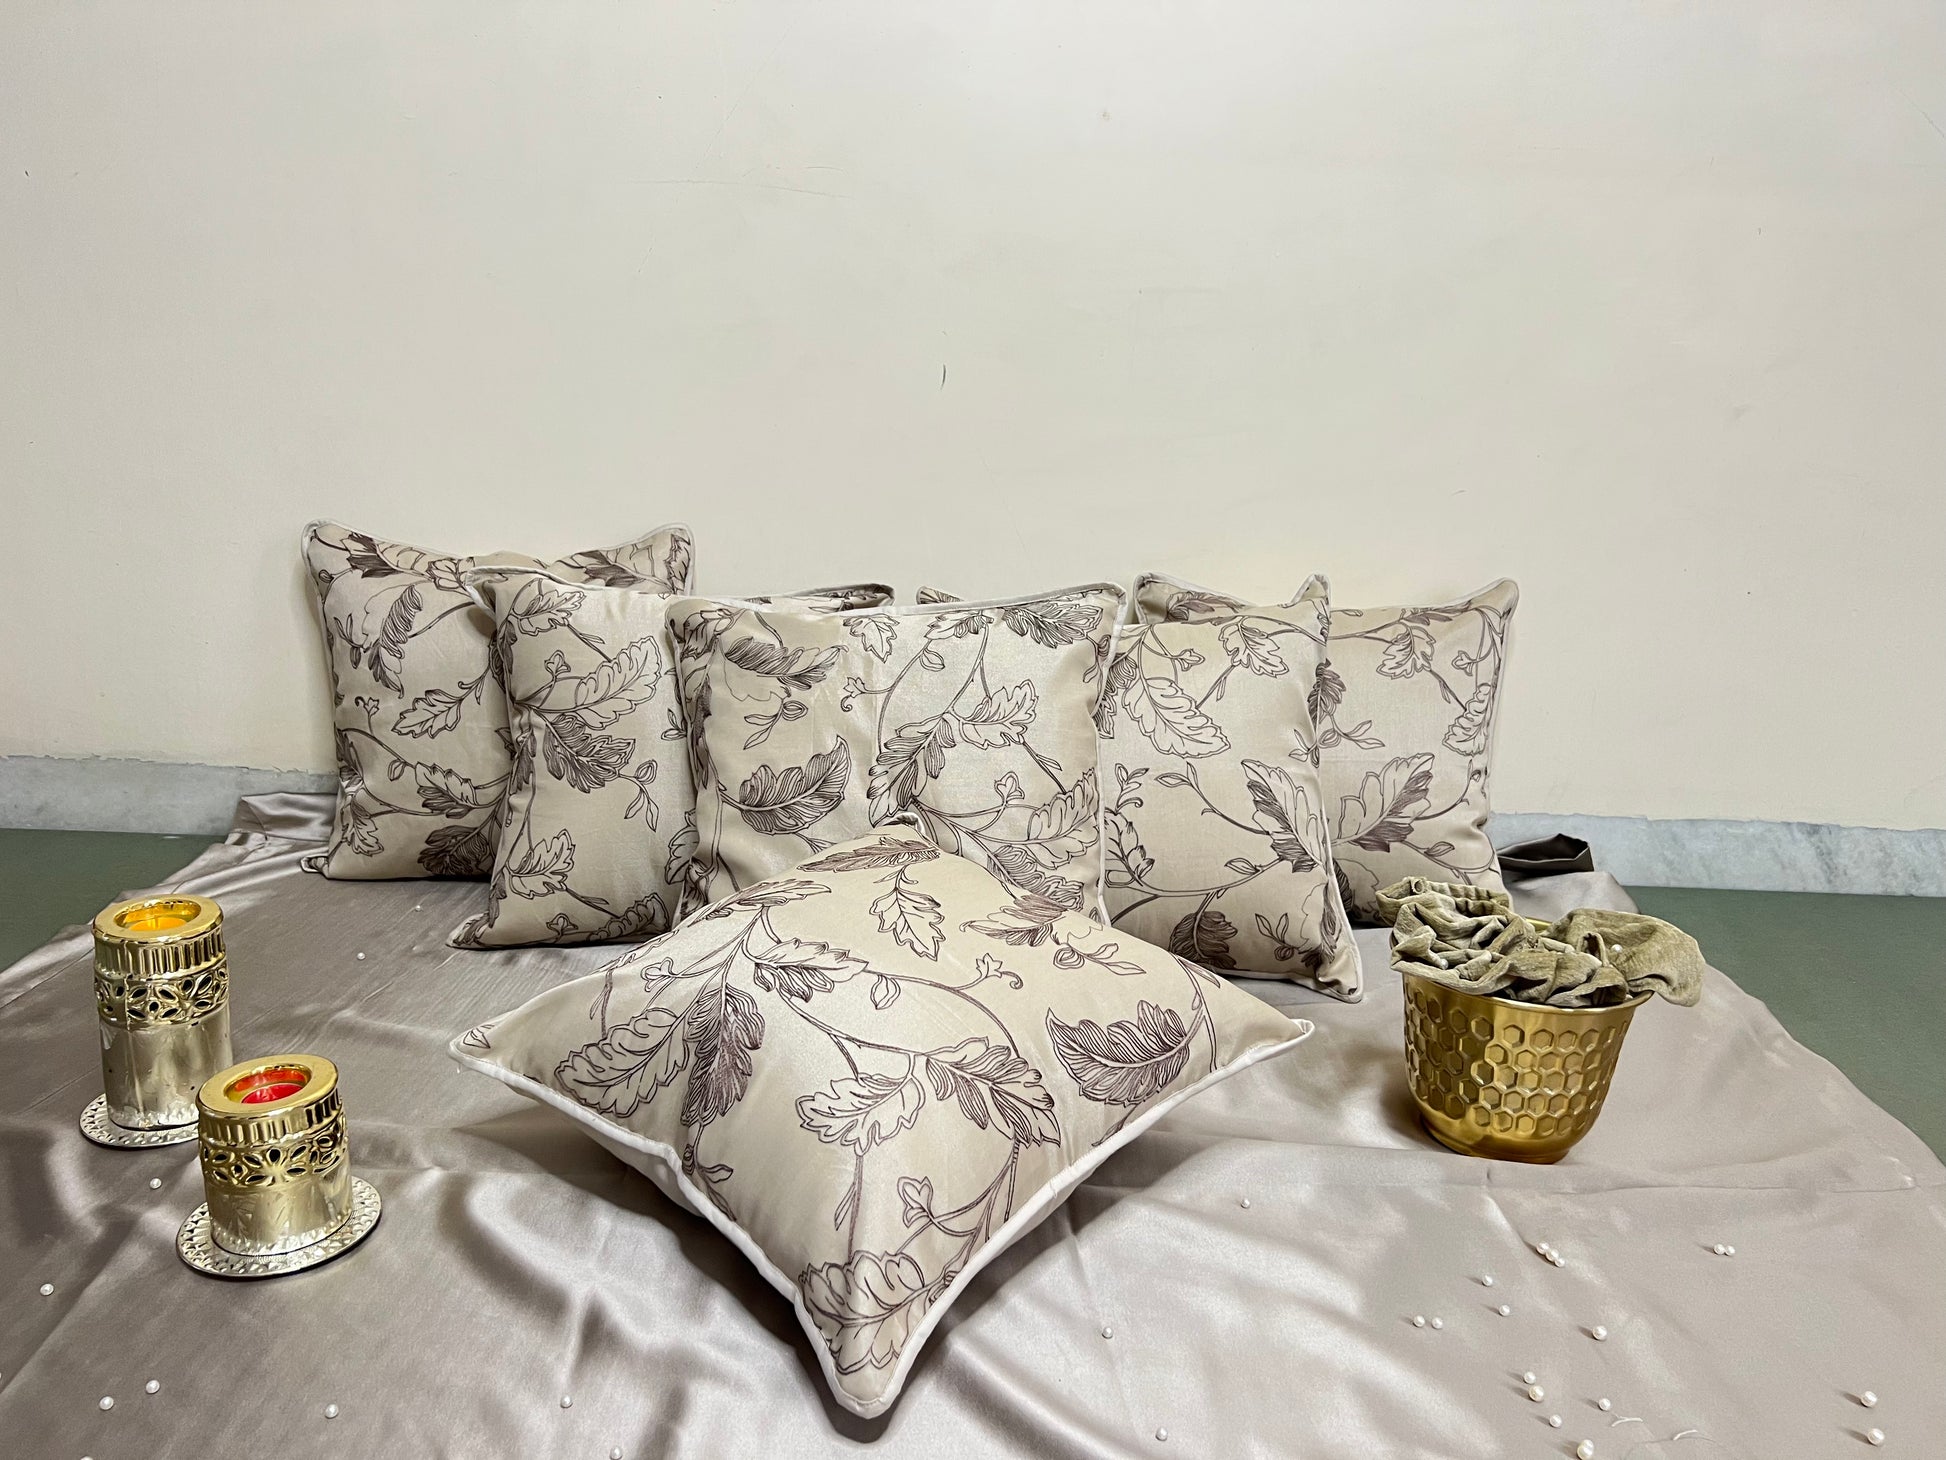 Enchanted Leaf Cushion Cover Sets at Kamakhyaa by Aetherea. This item is Beige, Cotton, Cushion covers, Embroidered, Home, Sheer, Upcycled